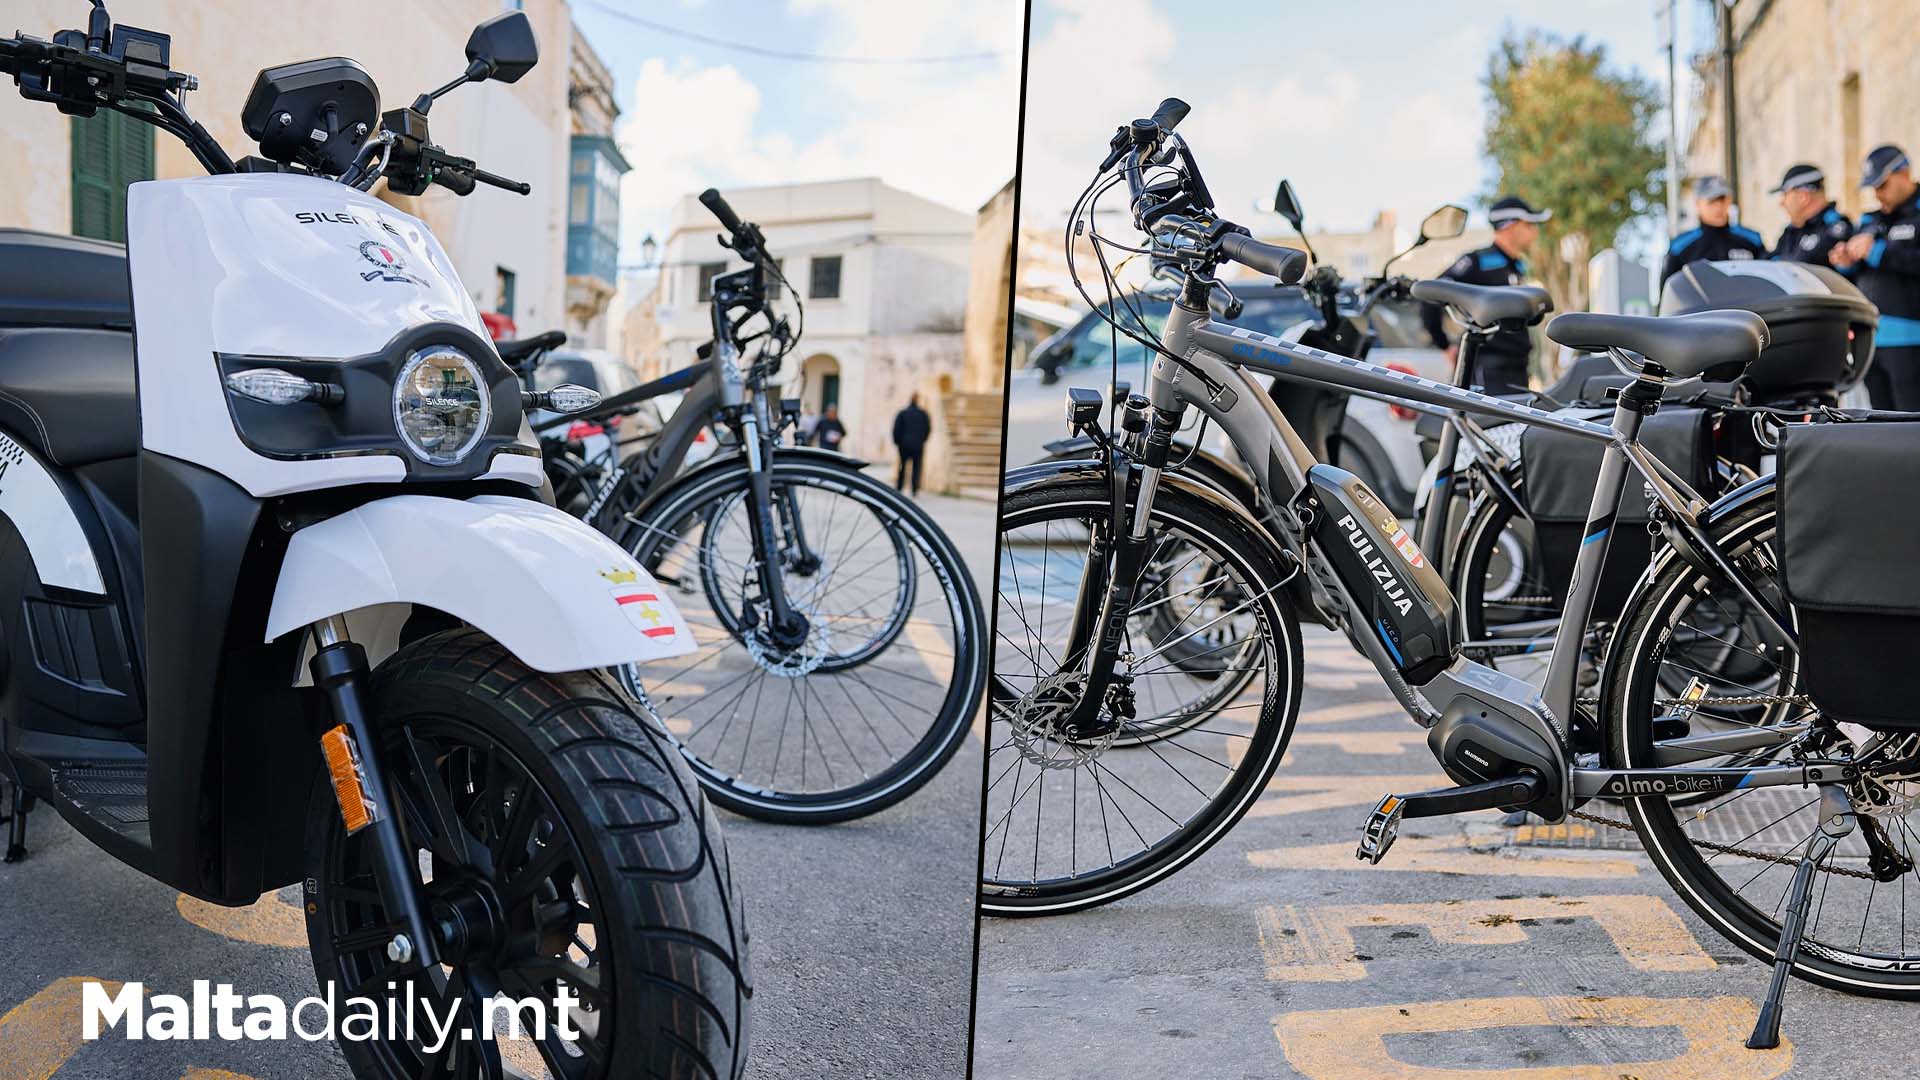 2 E-Bikes & Electric Scooter For Siġġiewi Community Police